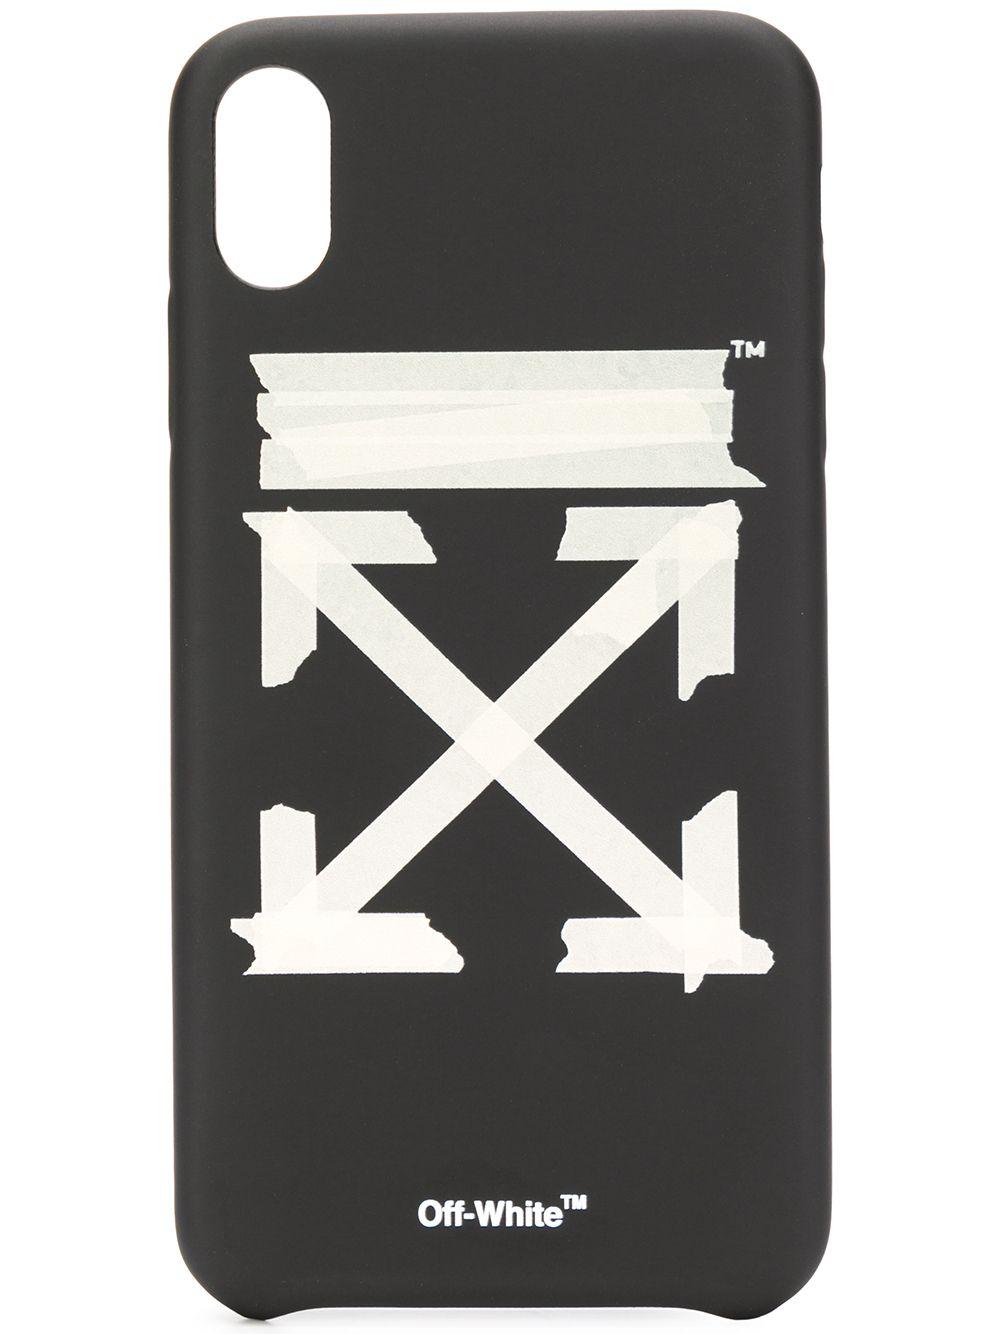 Off-White c/o Virgil Abloh Tape Arrow Iphone Xr Case in Black - Save 31% -  Lyst